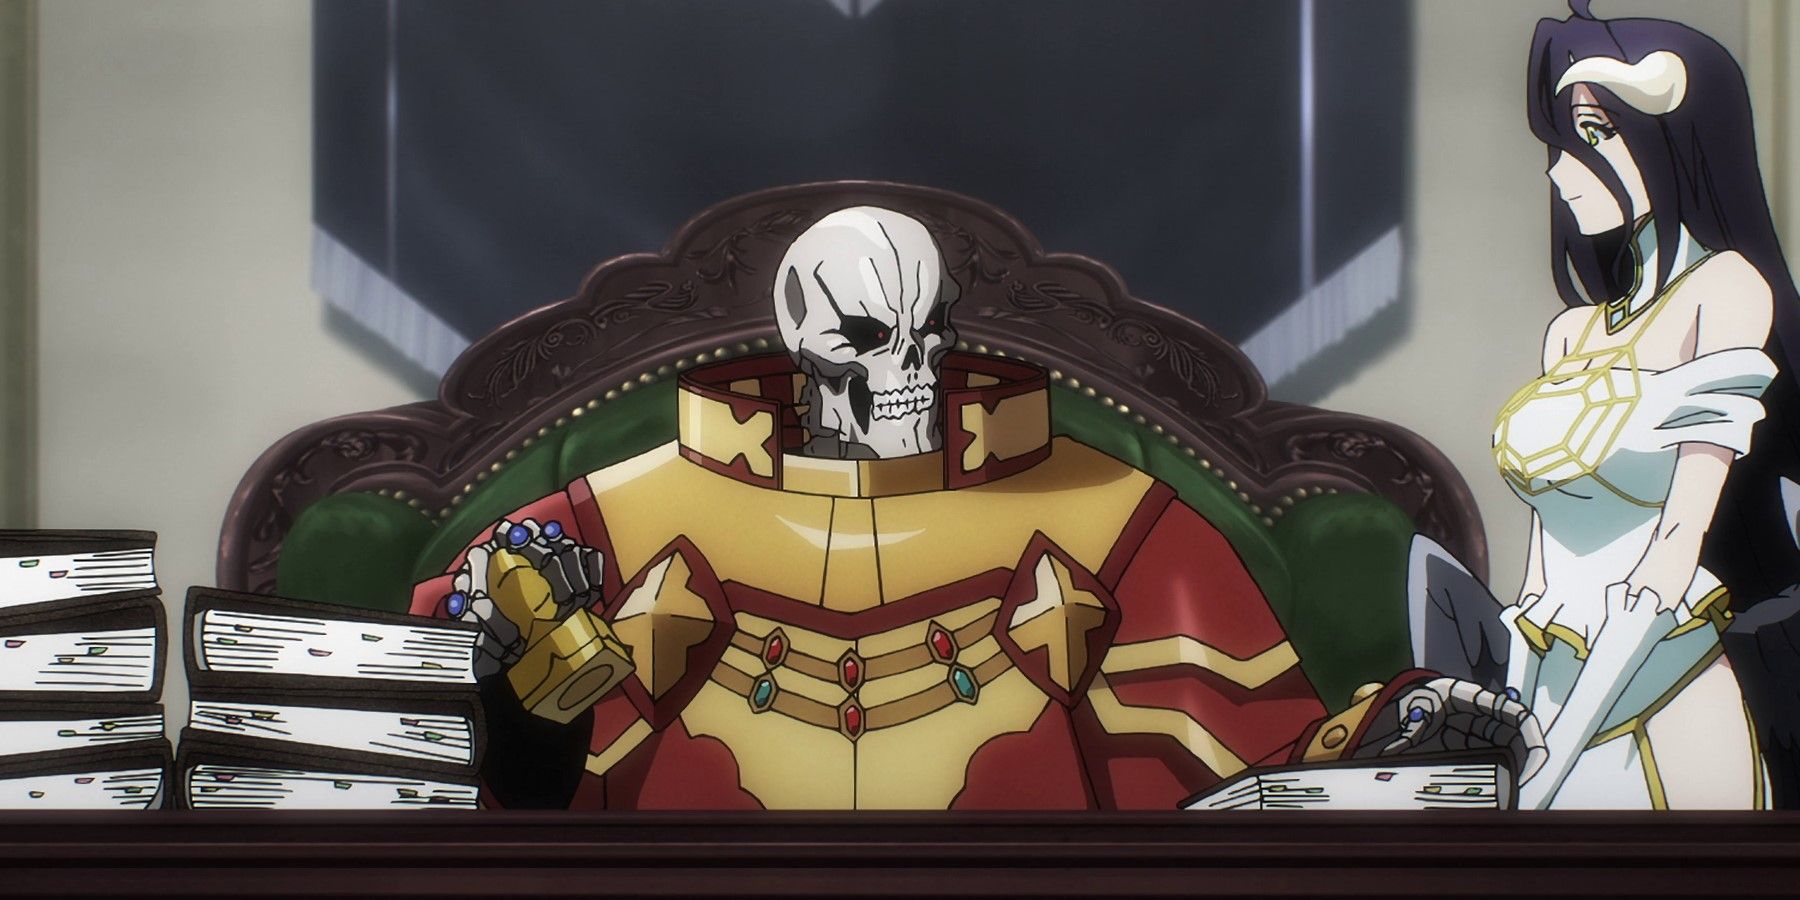 Who Can Beat Or Have A Good Fight With Ainz Besides Rubedo And Touch Me  That Is Not A Member Of Nazarick? : r/overlord